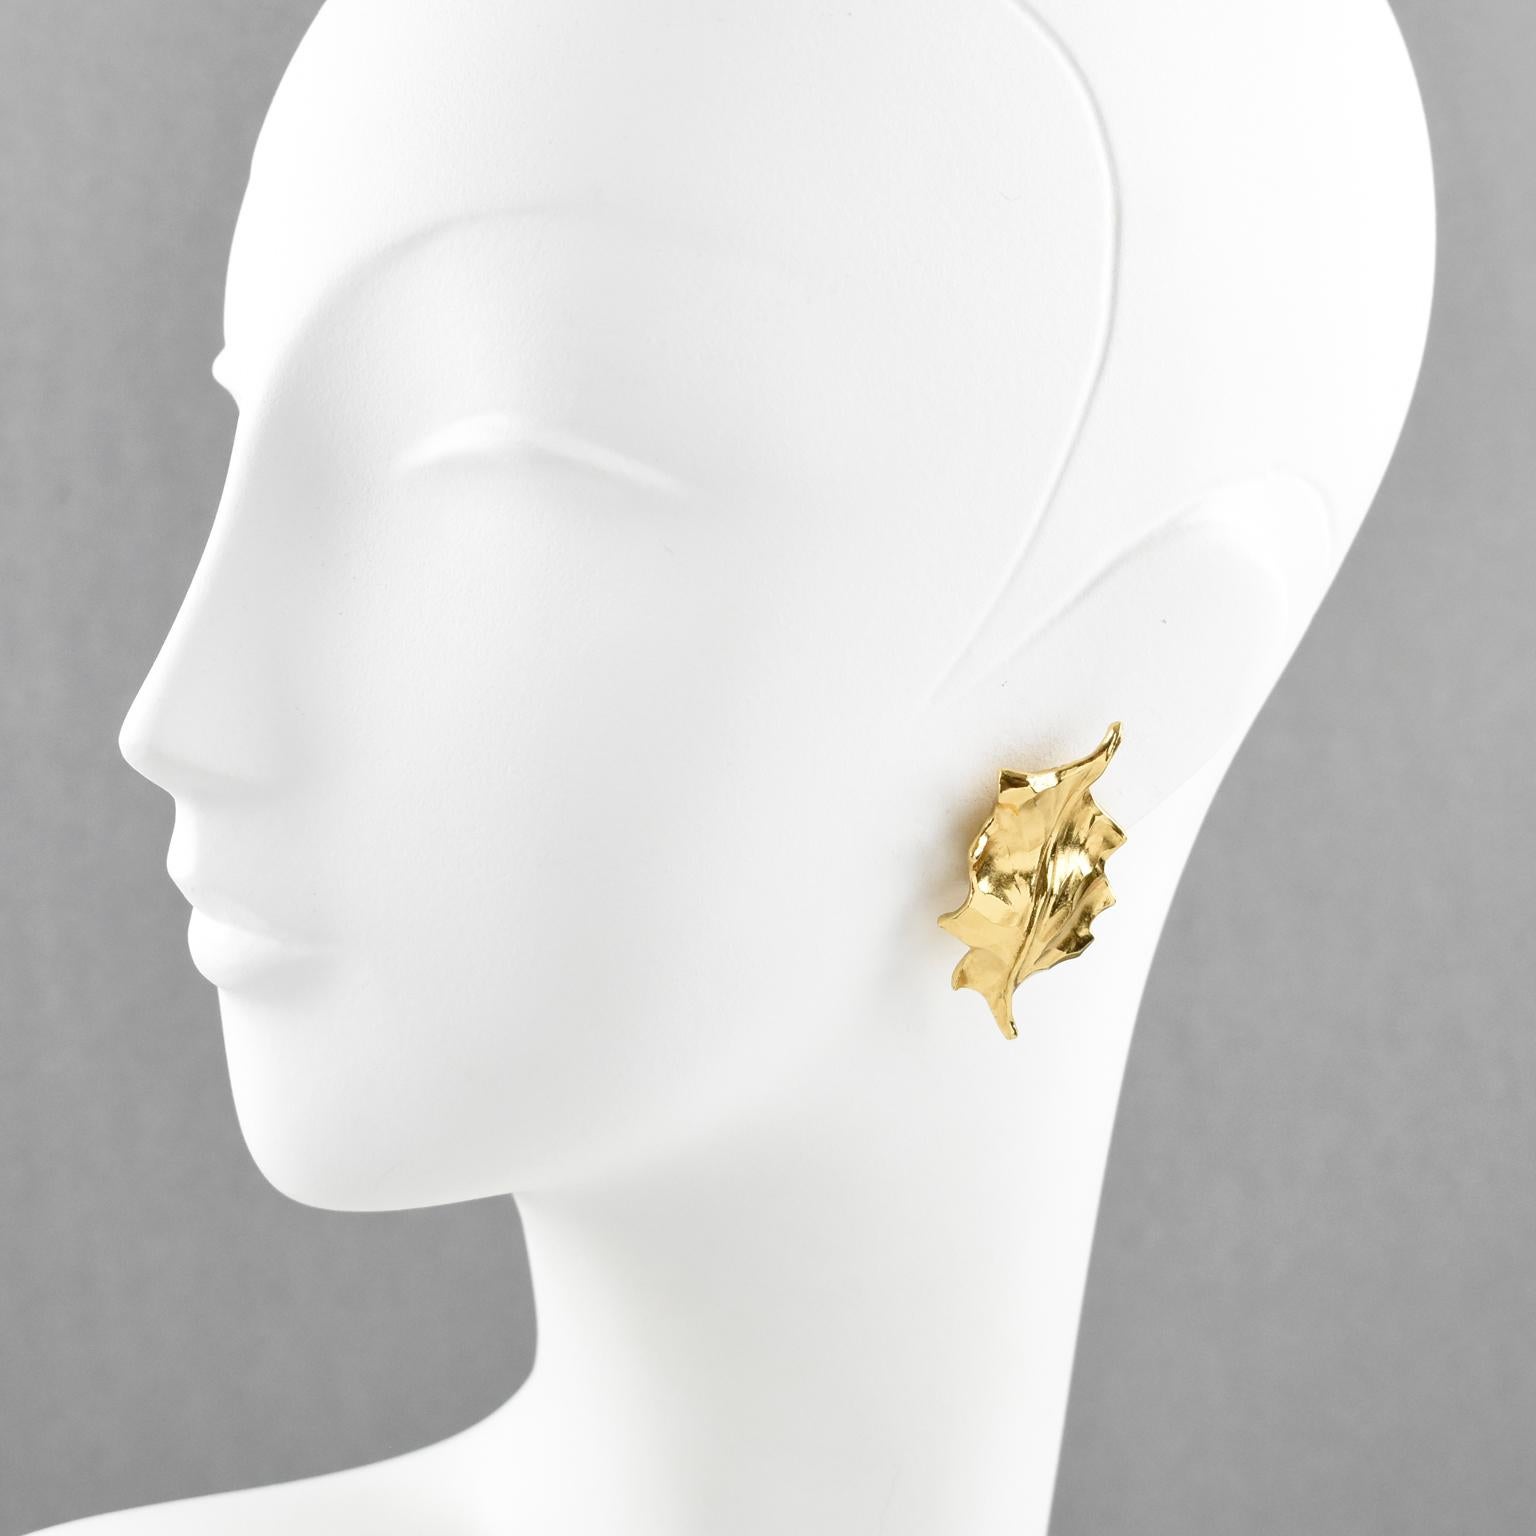 Elegant Yves Saint Laurent YSL Paris Leaf clip-on earrings. Featuring gilt metal bold floral shape with a holly leaf, metal all textured with dimensional carved design. Signed at the back 